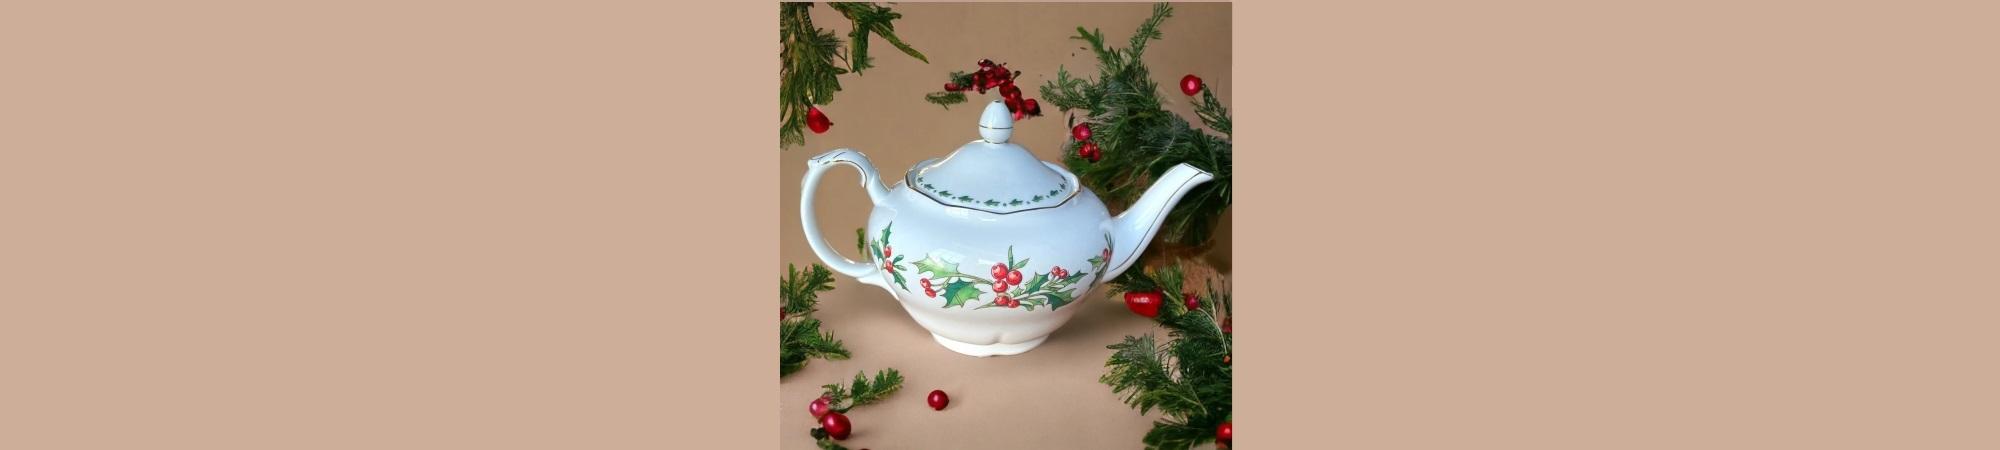 White teapot with holly leaves and red berries, a standard pattern.